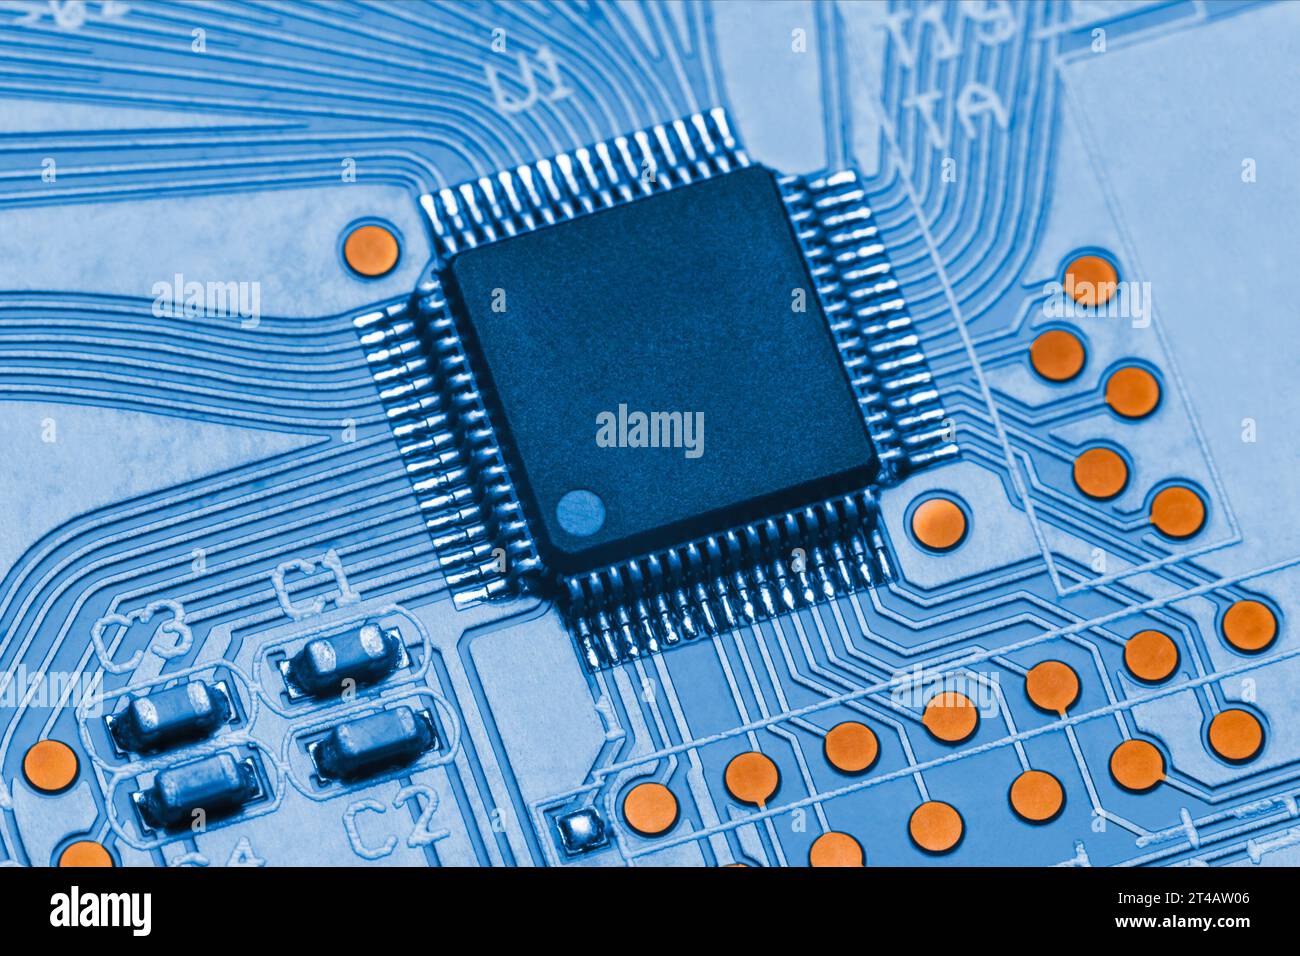 Chip in QFP package on blue printed circuit board. Technologies and microelectronics. Macro photography Stock Photo